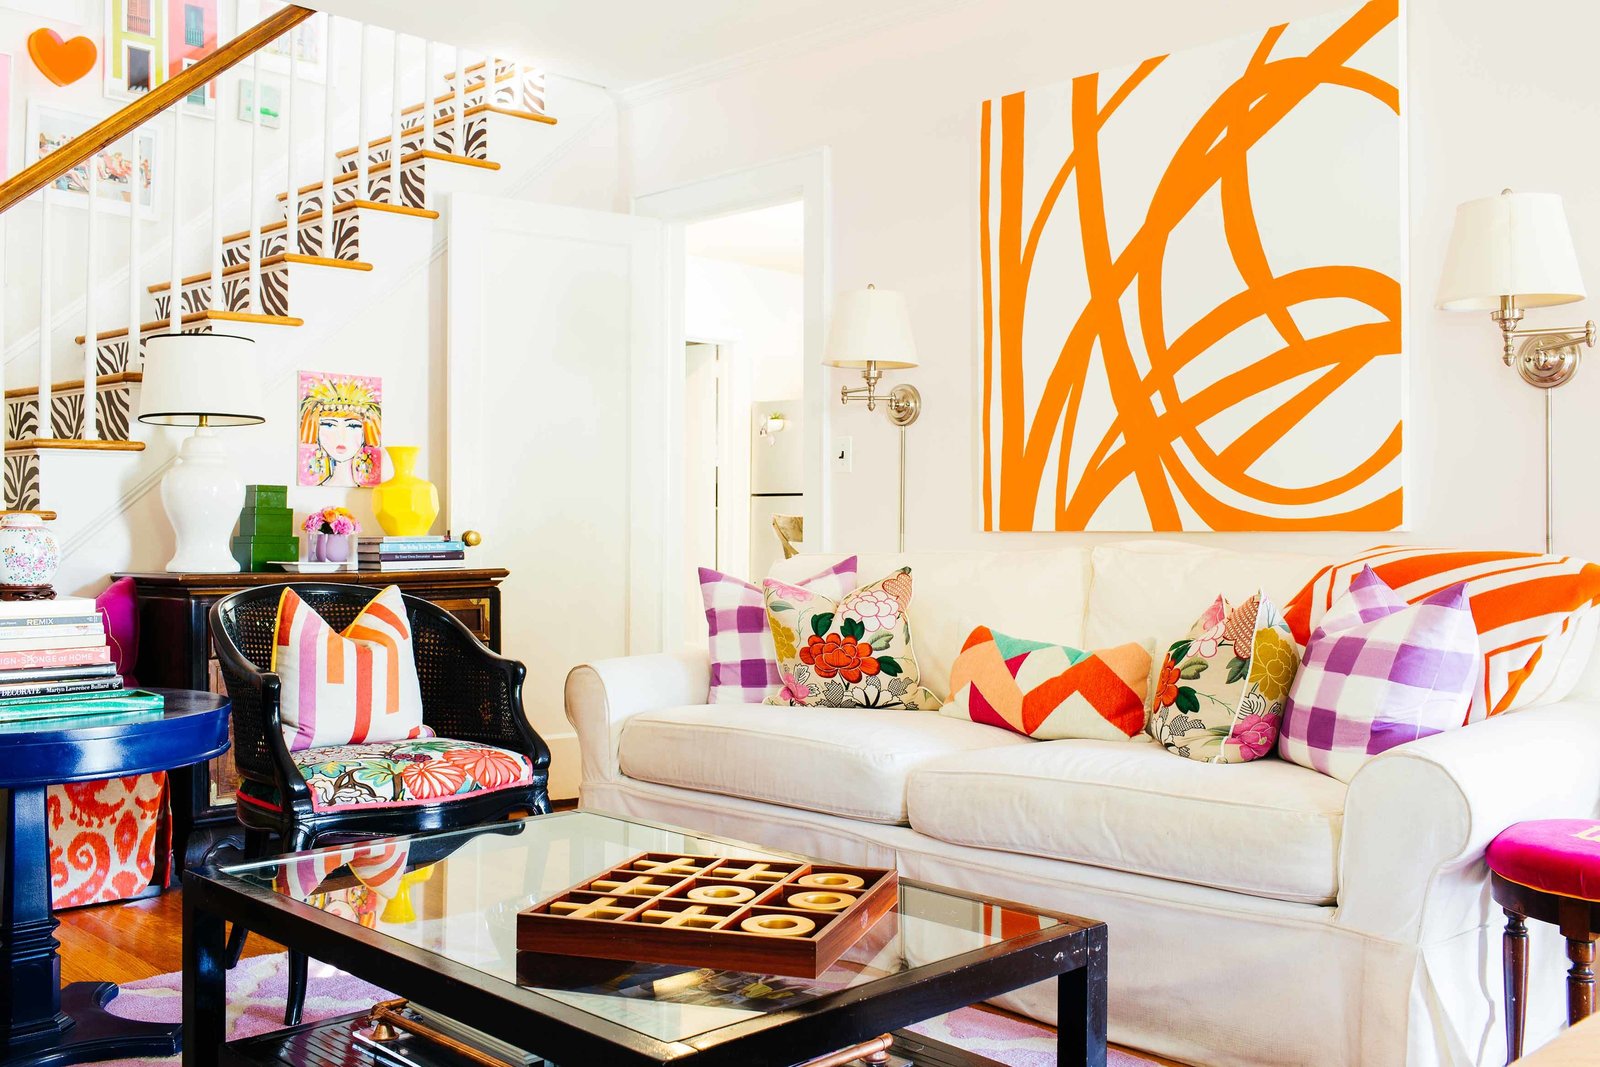 A colorfully decorated living space in Westbury, NY.